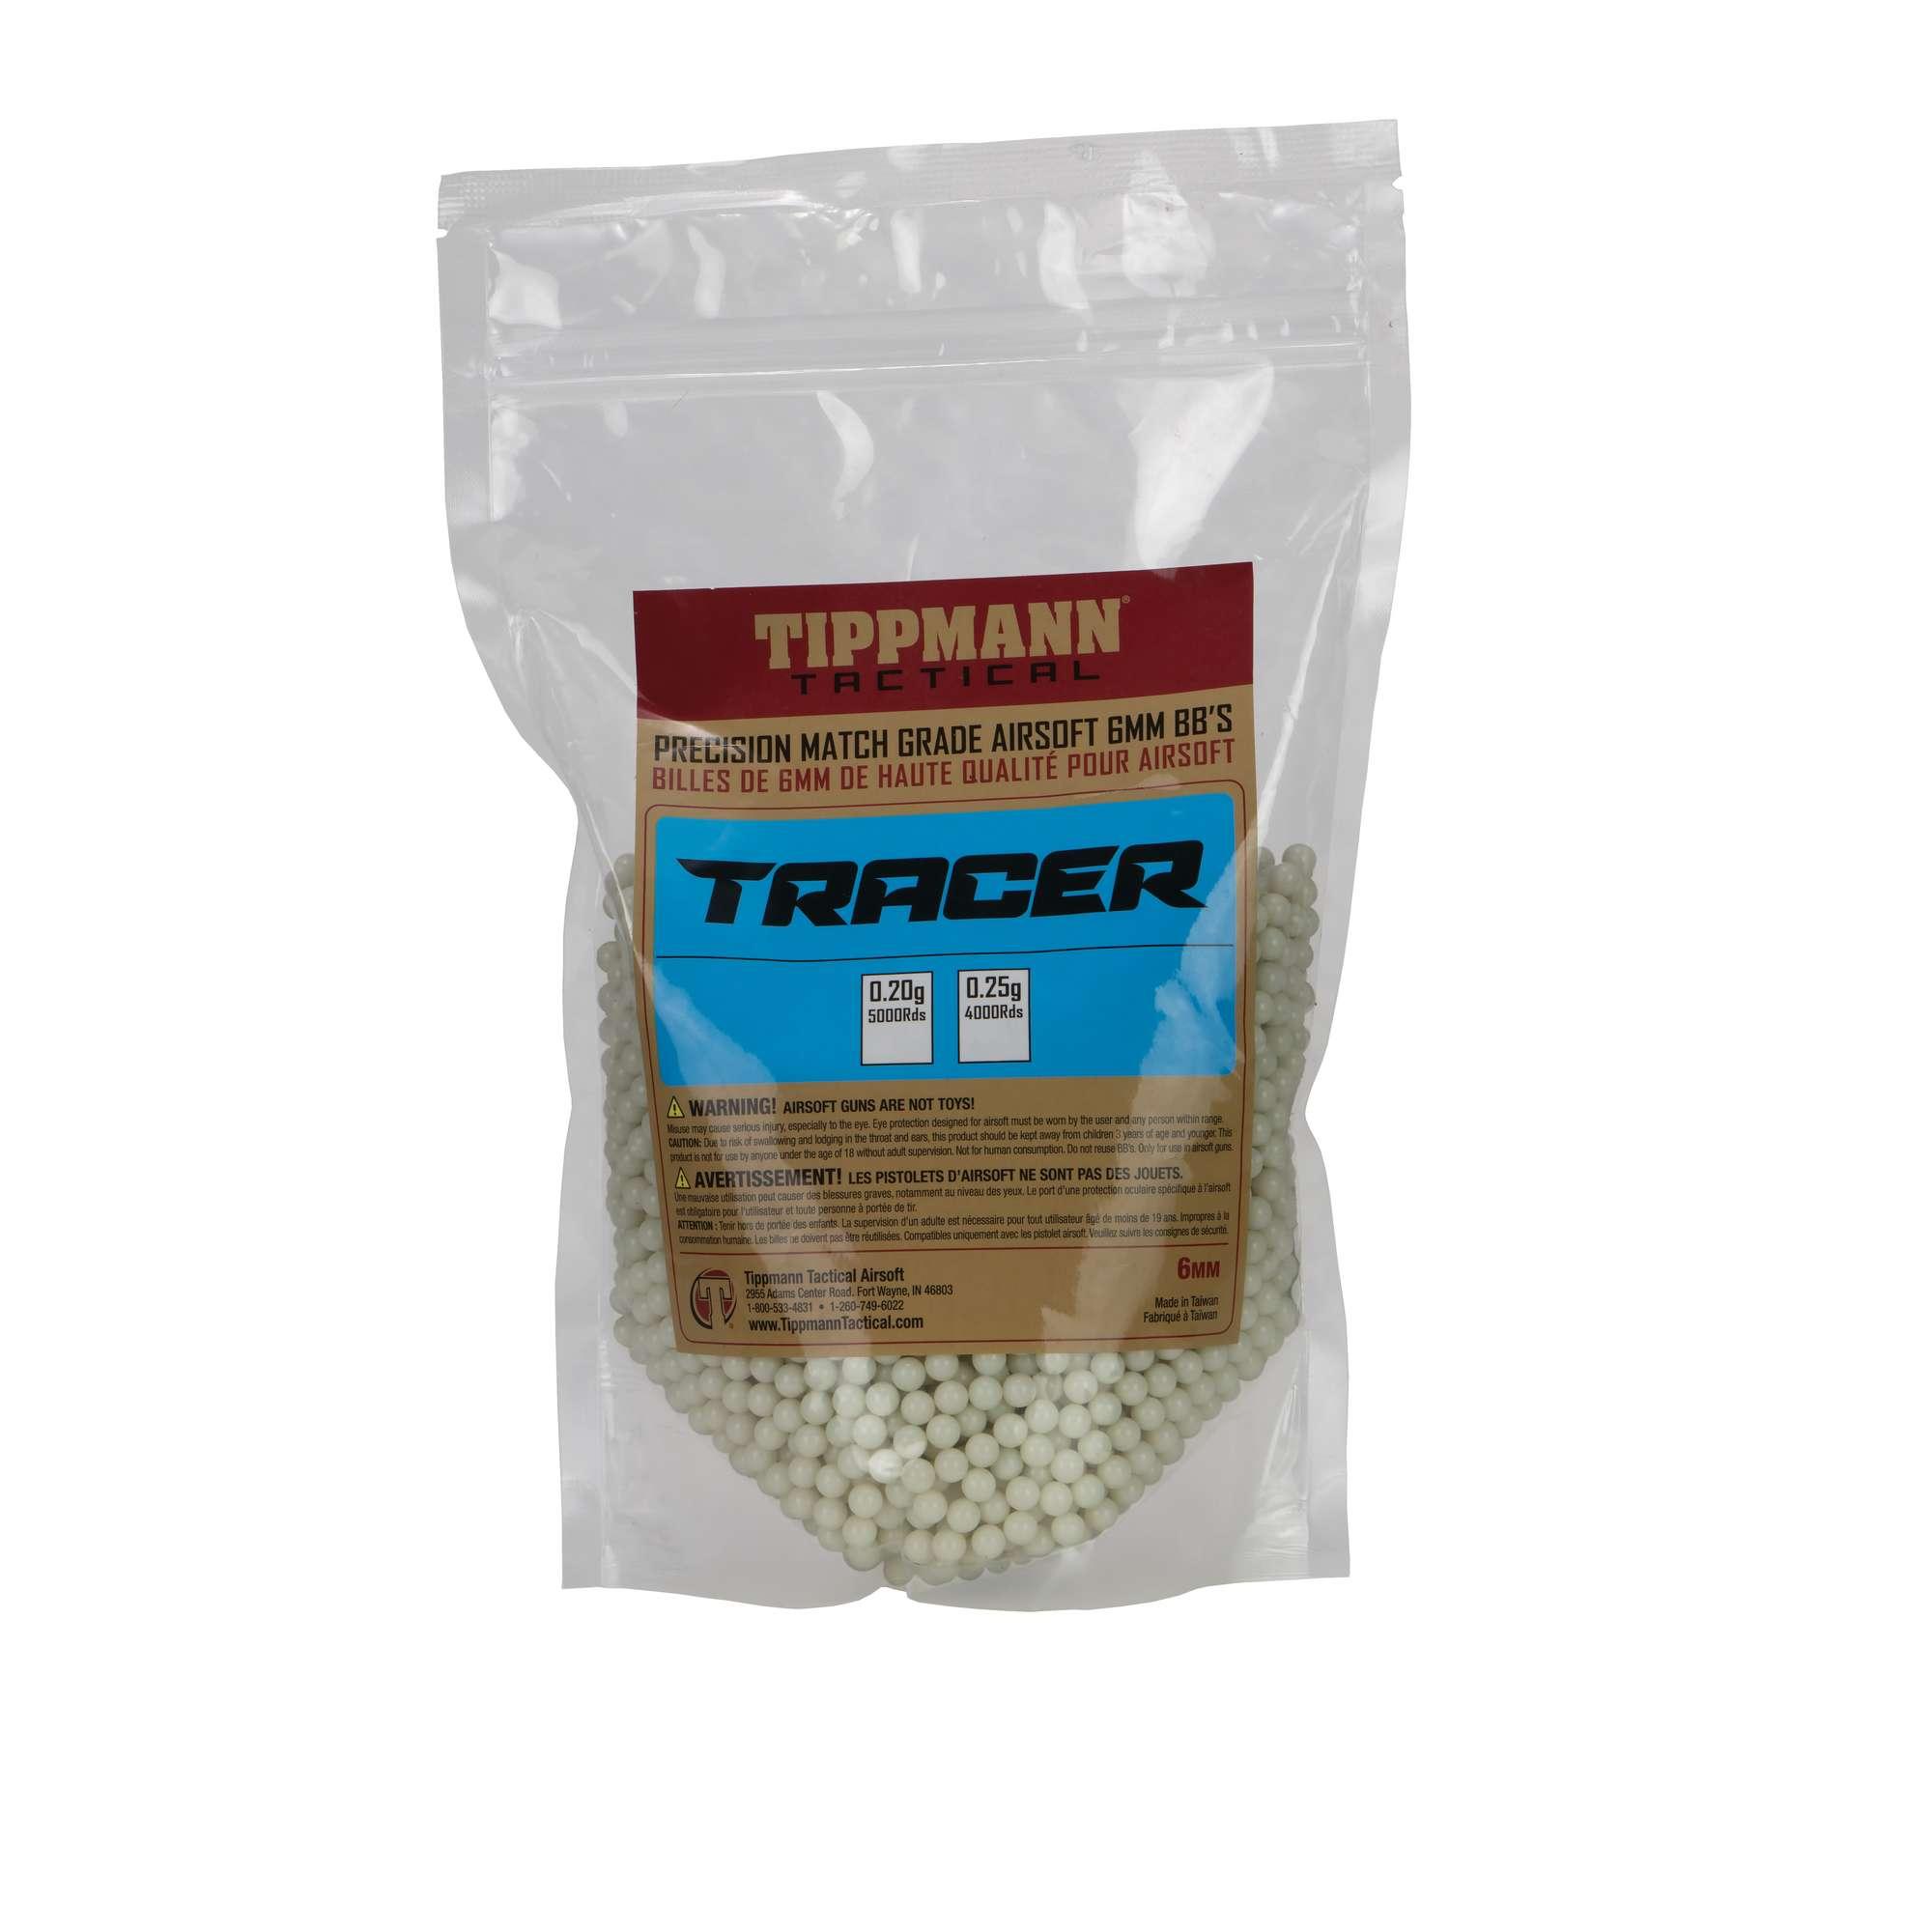 Tippmann Tactical Tracer Airsoft Ammo 20g 5K Glow, 6mm, 5000 count